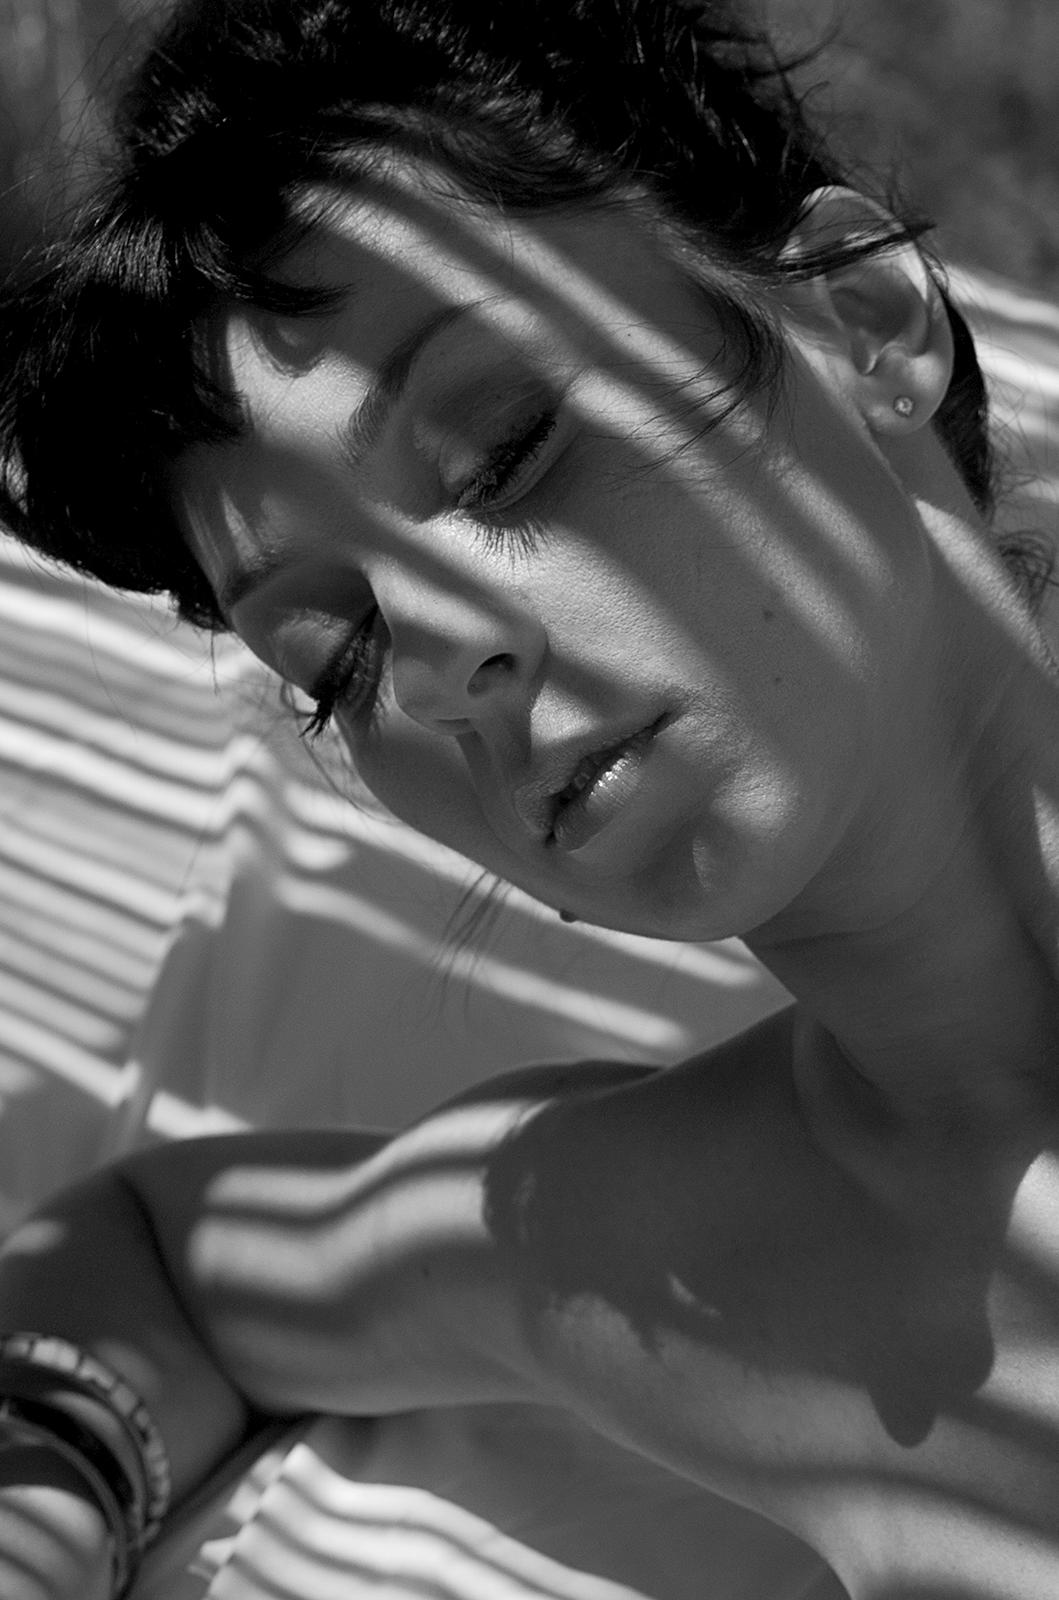 Karina -Signed limited edition nude print, Black white, Contemporary, Sexy woman - Photograph by Ian Sanderson